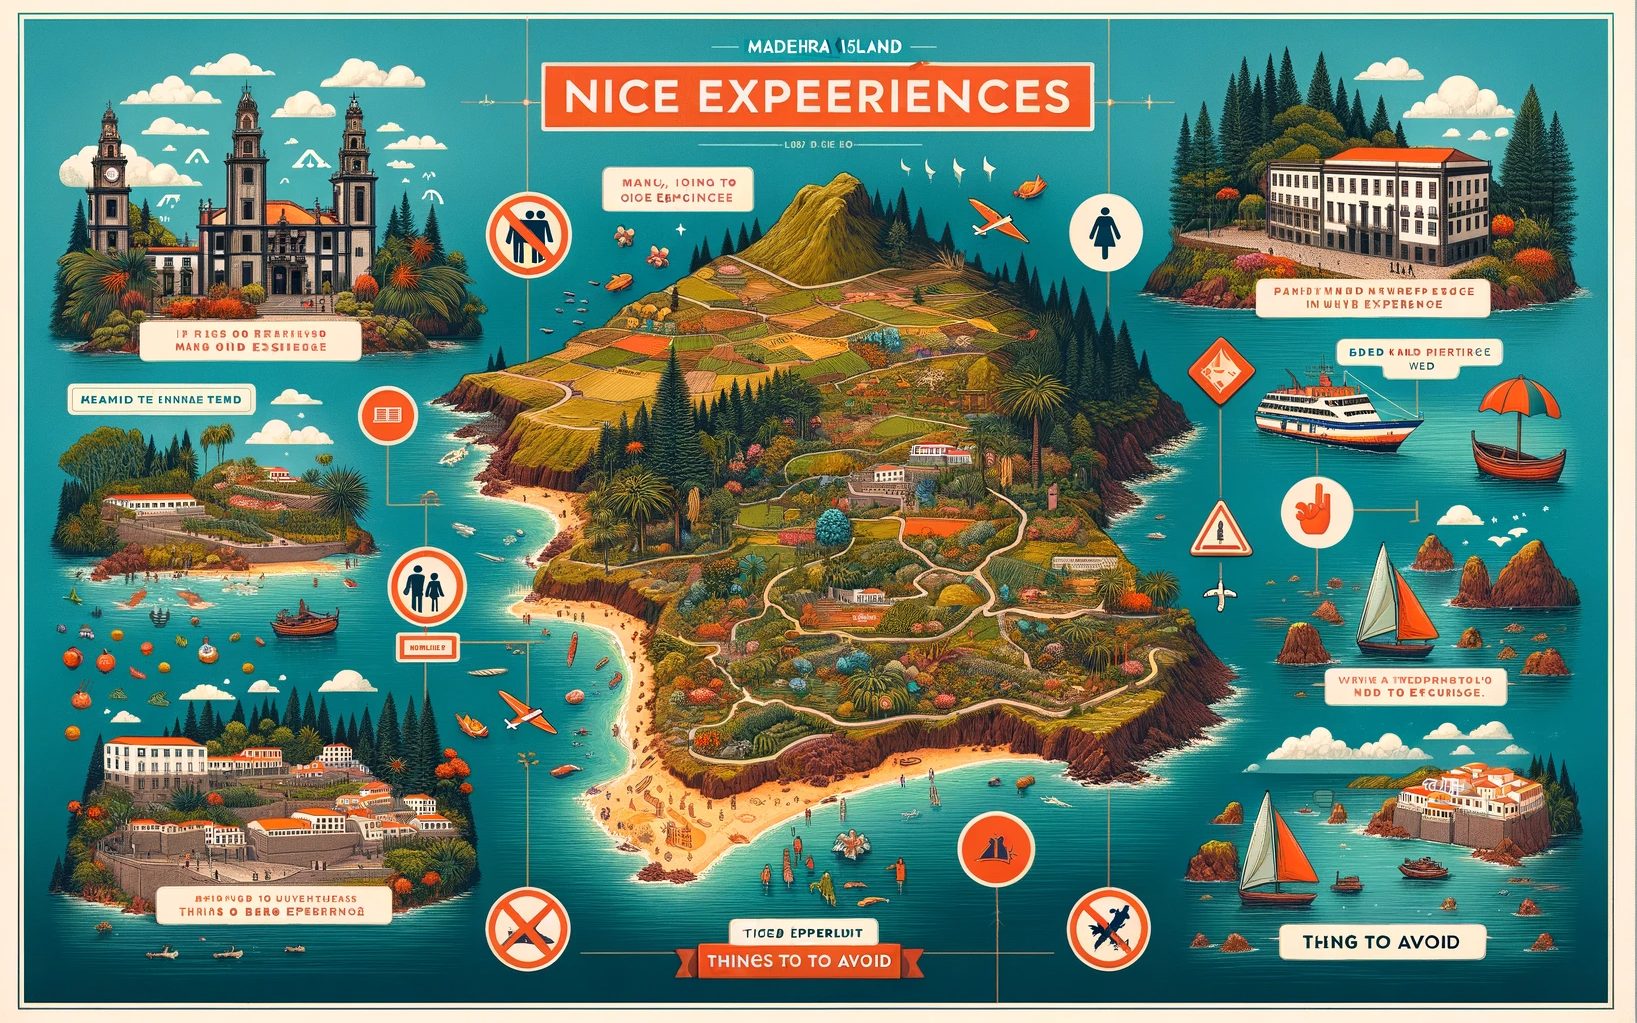 Illustrated map of Madeira Island with attractions and warnings.